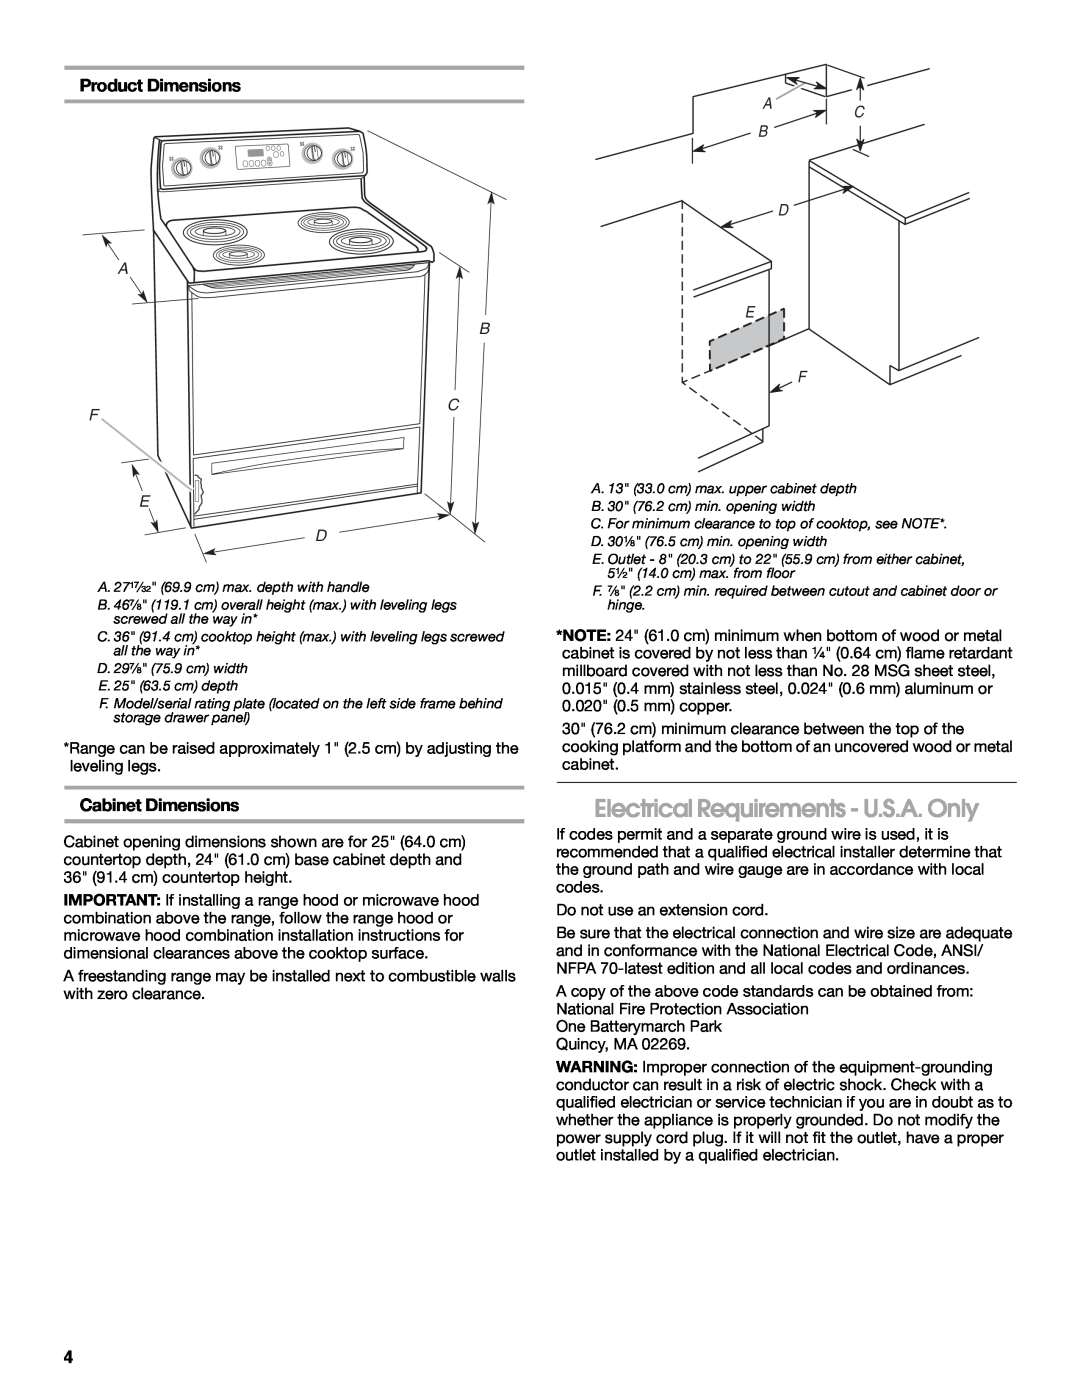 Maytag W10252706B Electrical Requirements - U.S.A. Only, Product Dimensions, Cabinet Dimensions, A C B D E 